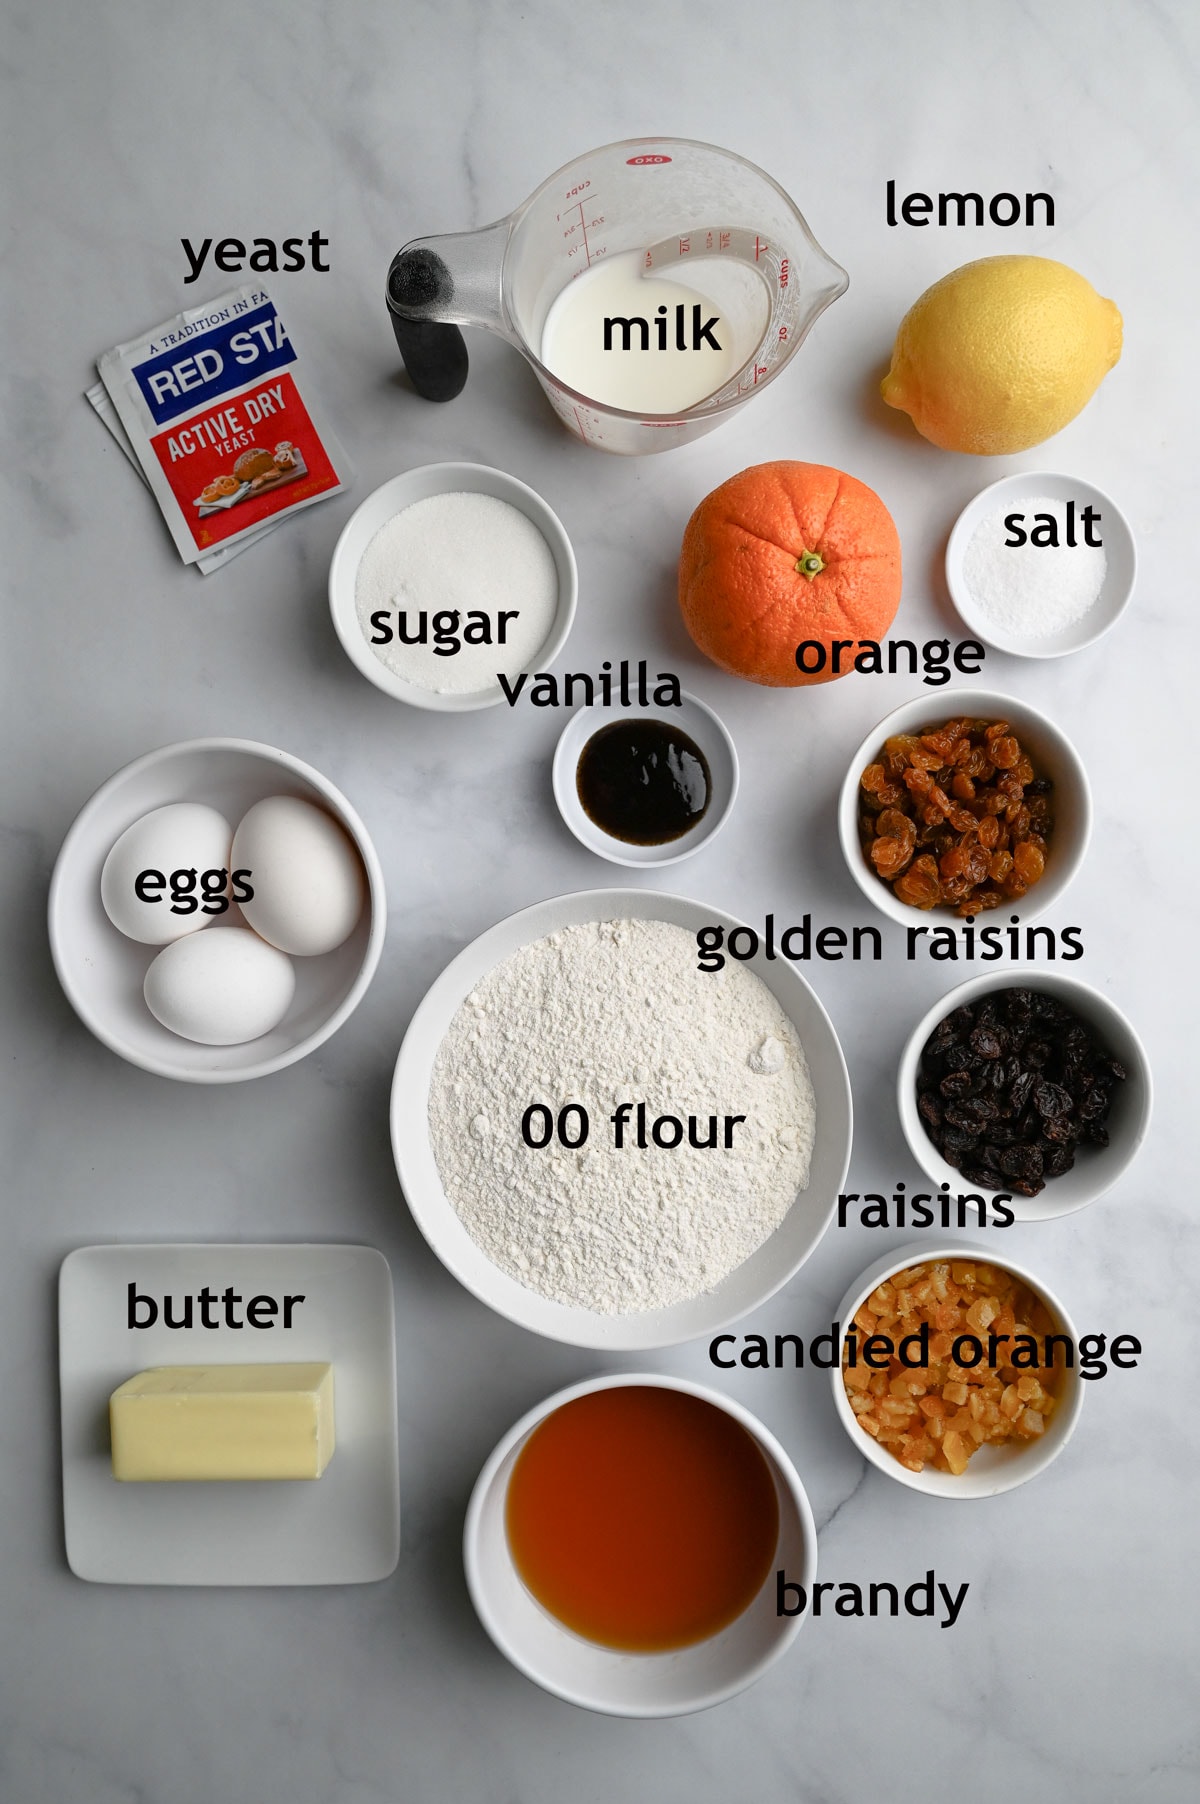 Ingredients for Panettone, including 00 flour, eggs, butter, milk, sugar, yeast and dried fruits.